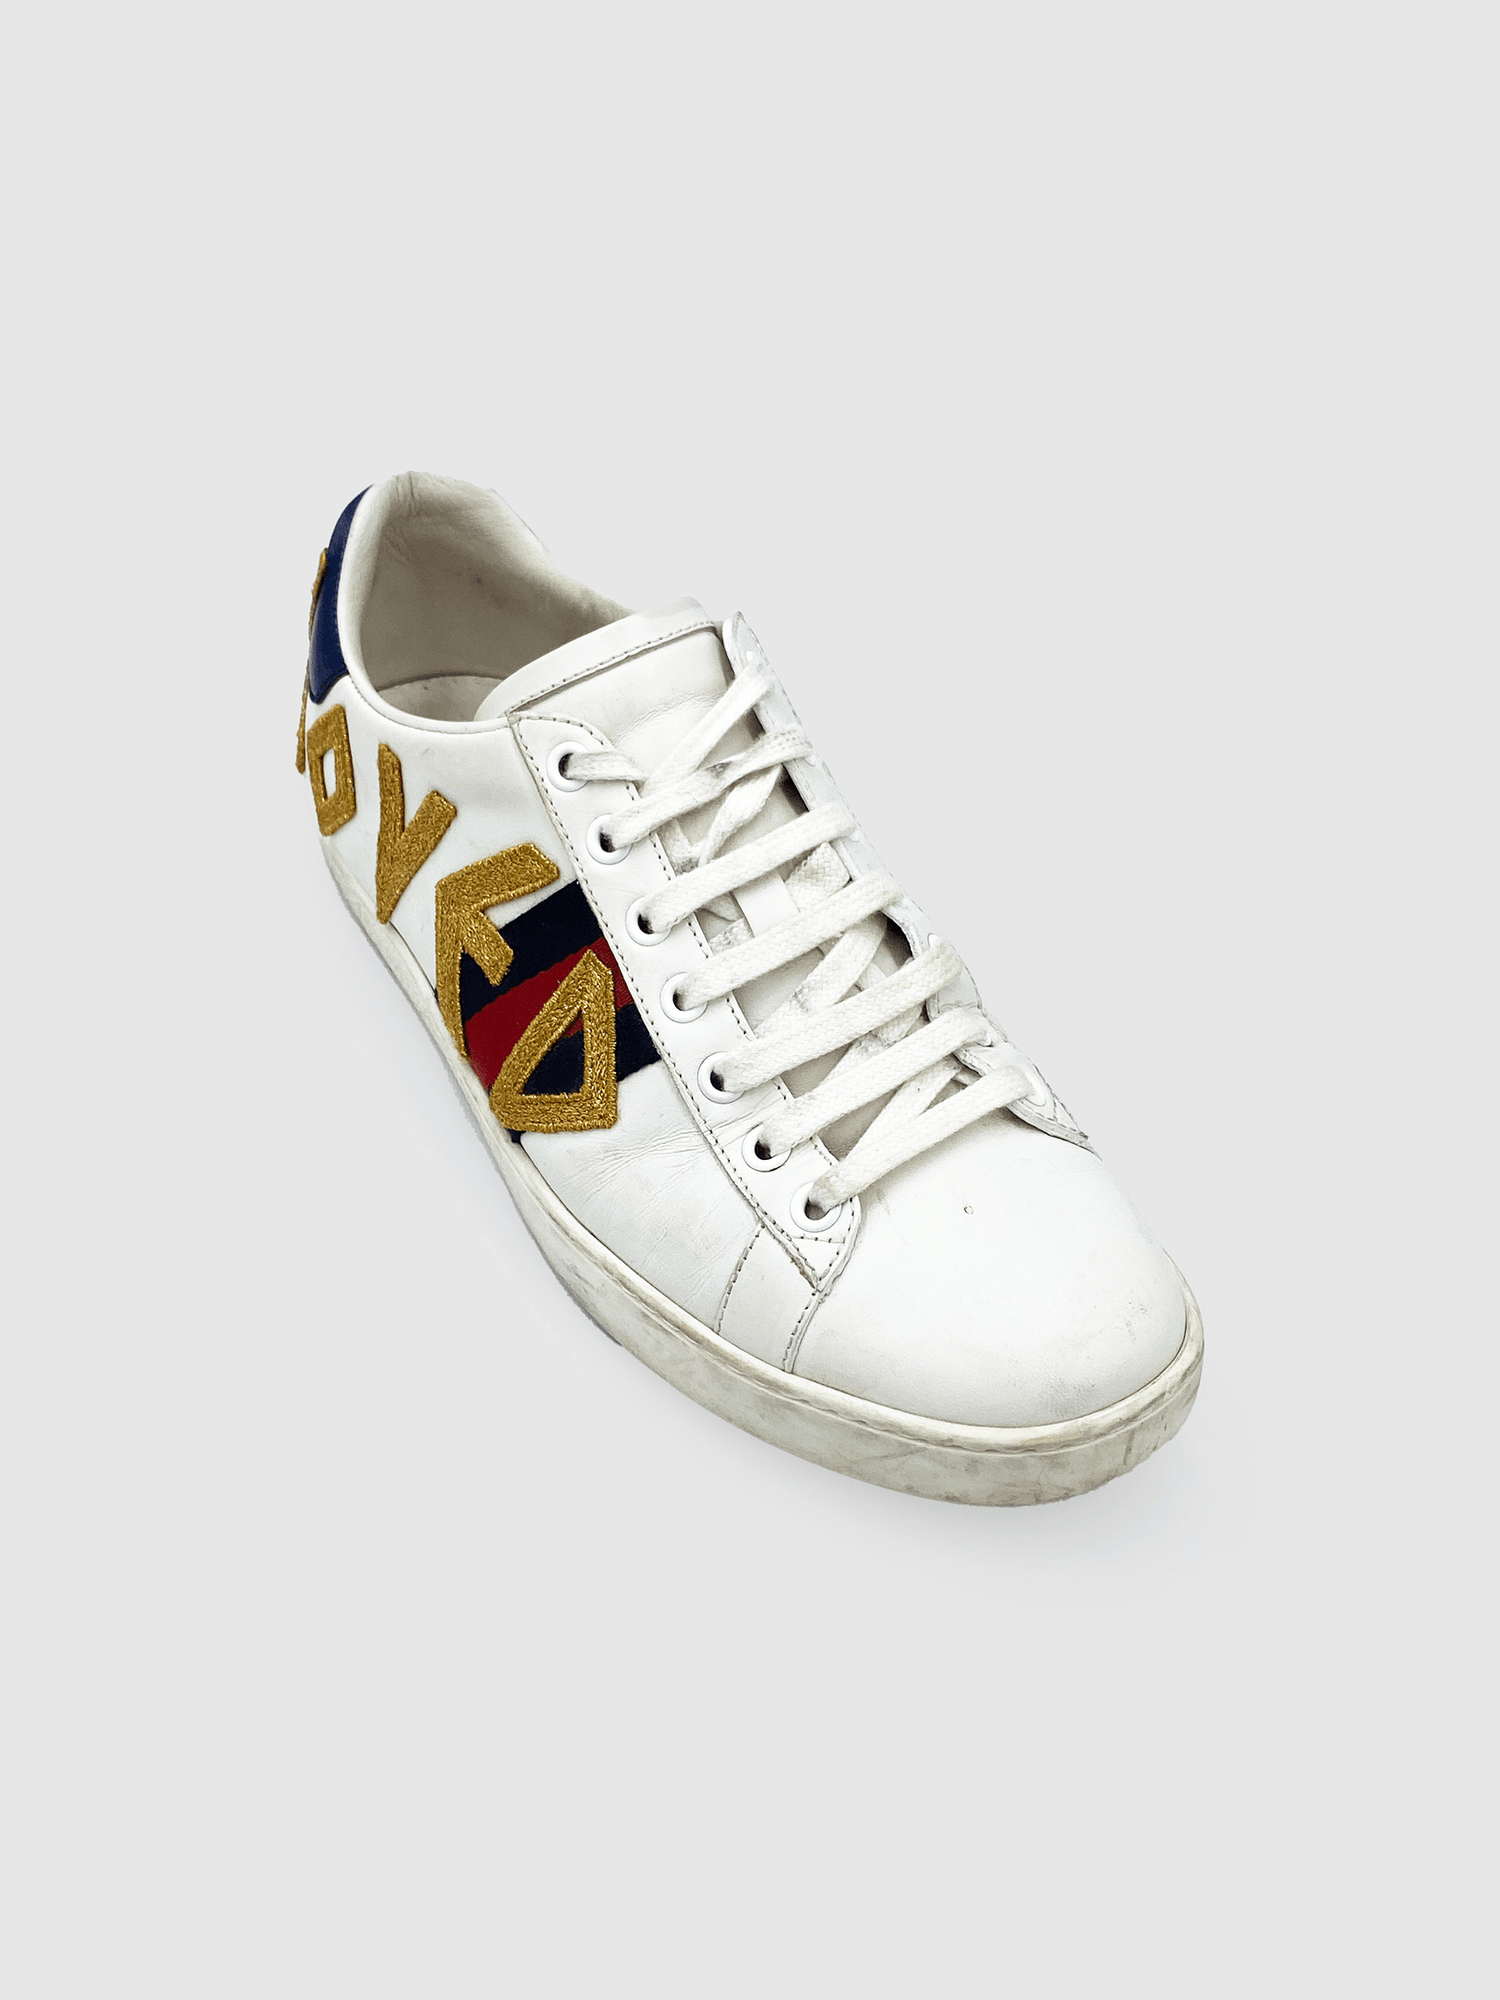 Gucci Ace Loved Sneaker